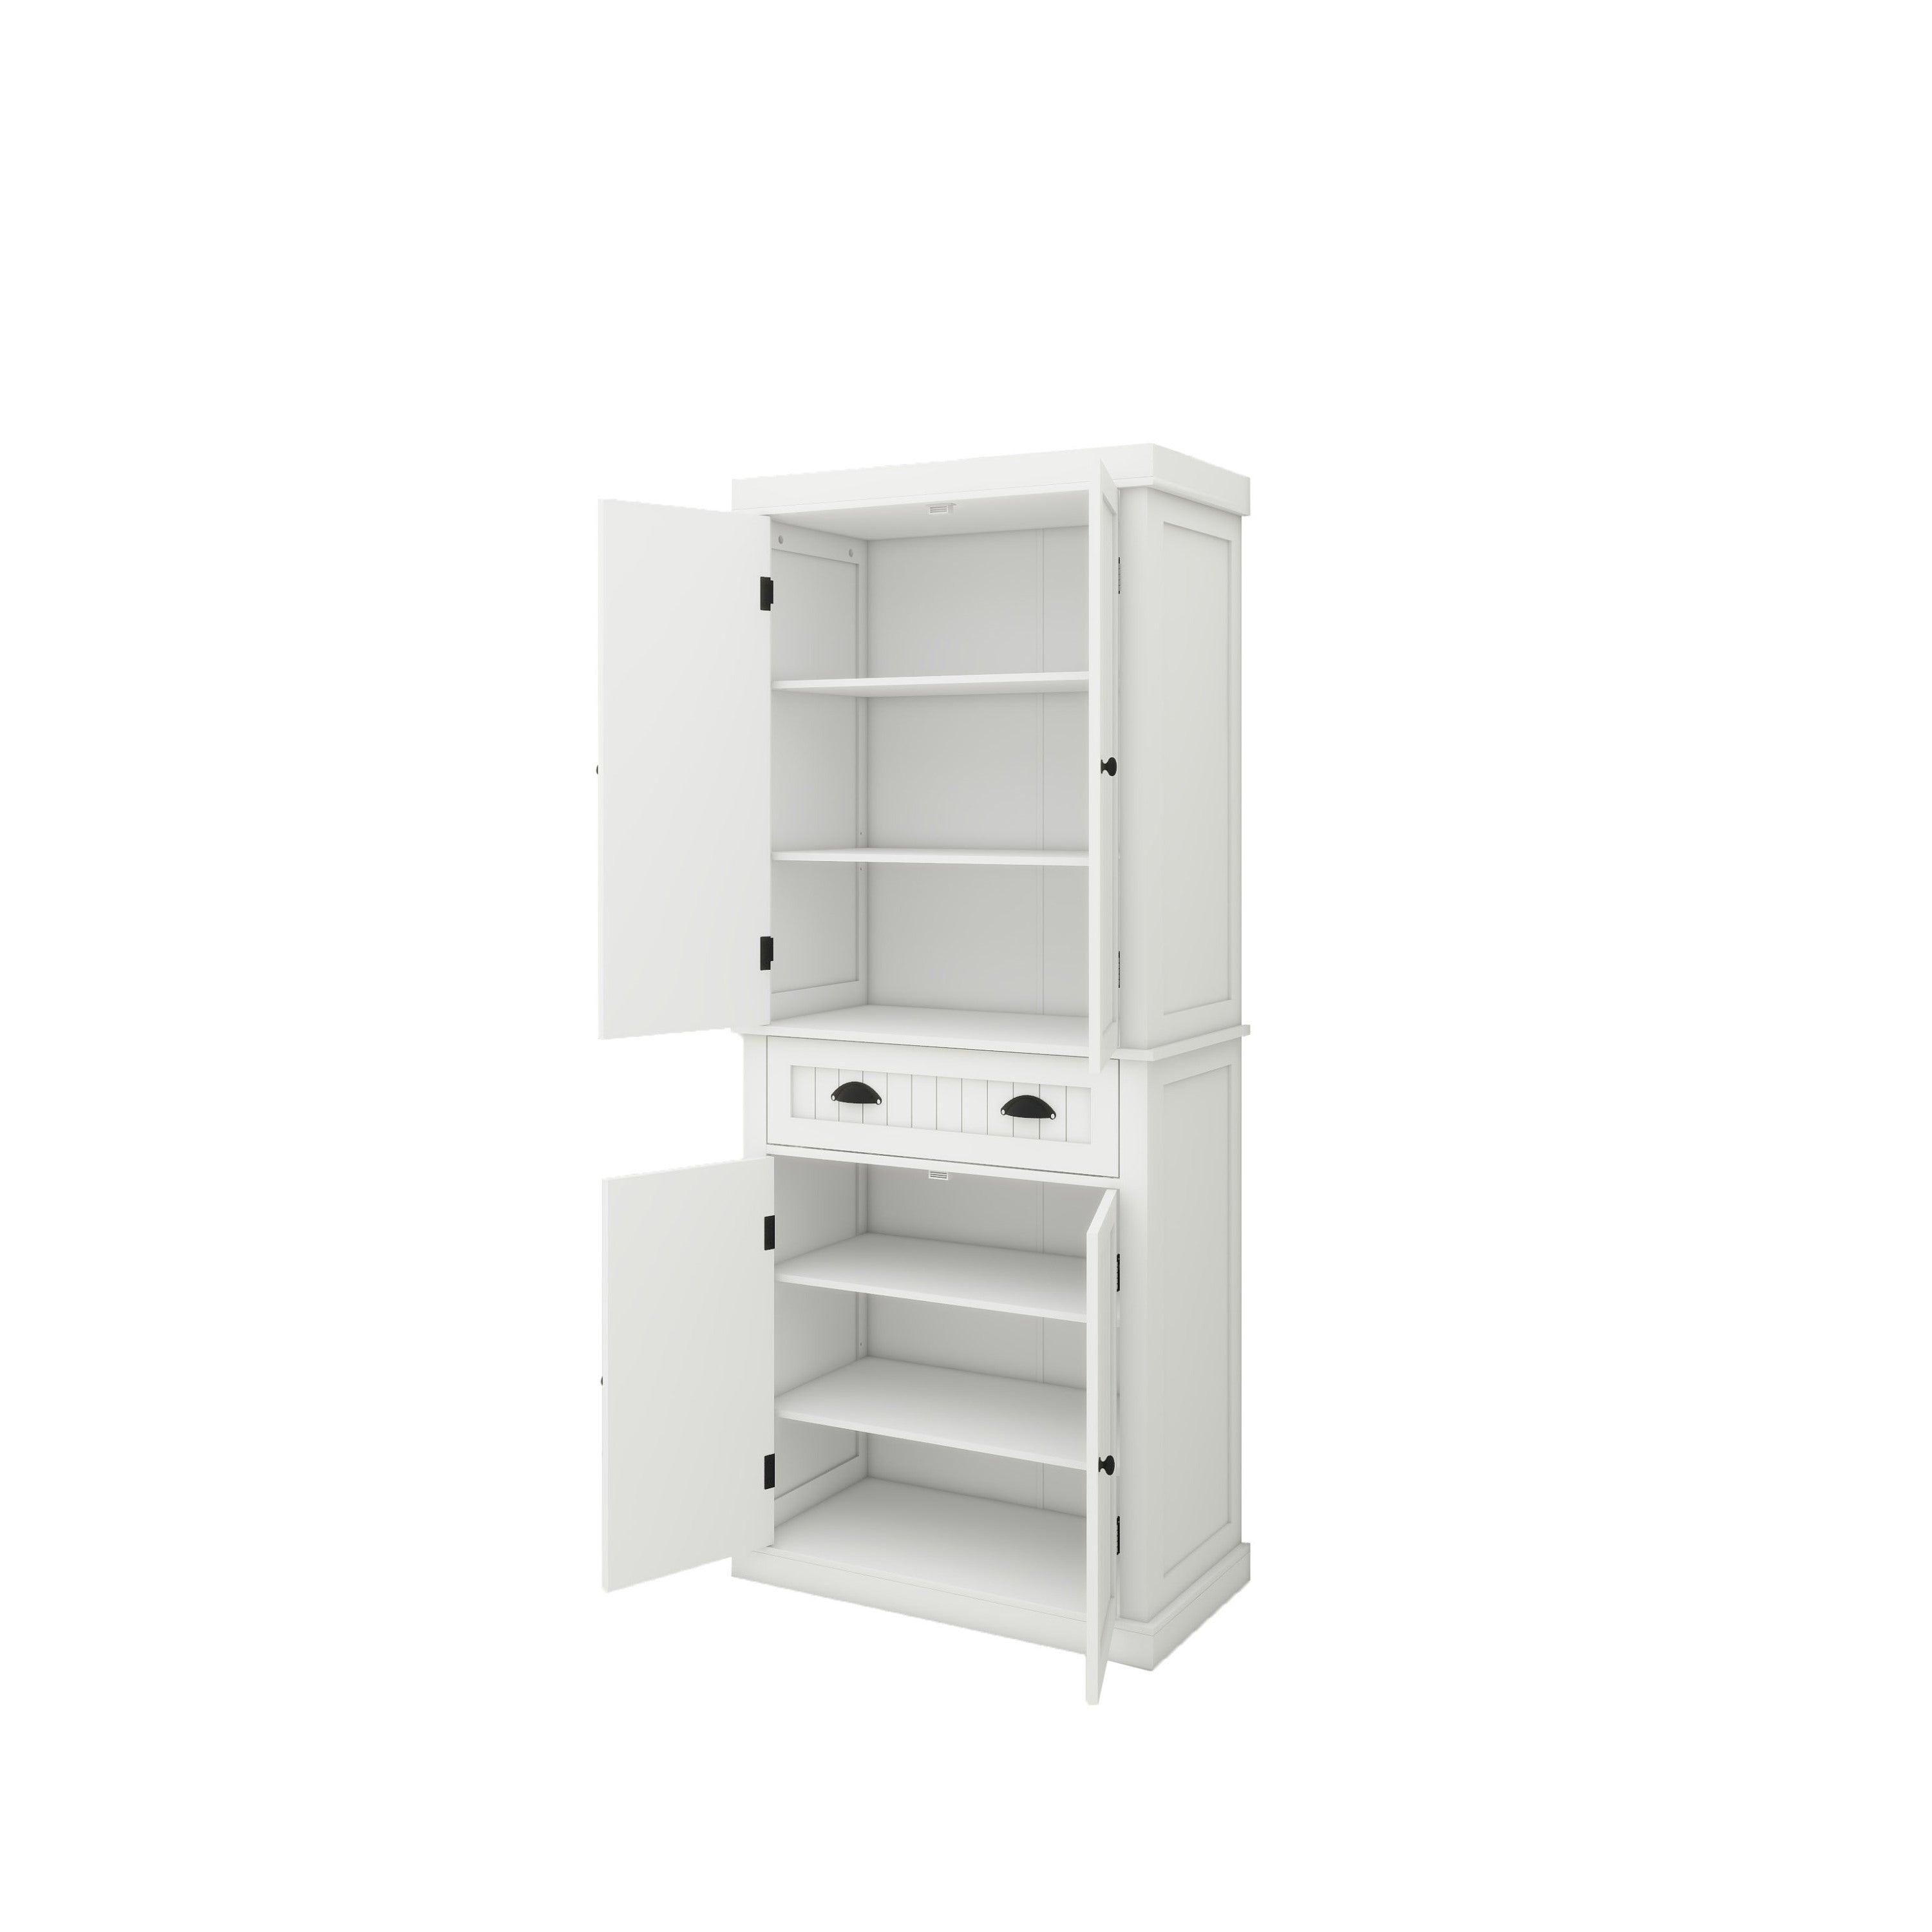 Four doors and a drawer cabinet ordinary slotted models-White